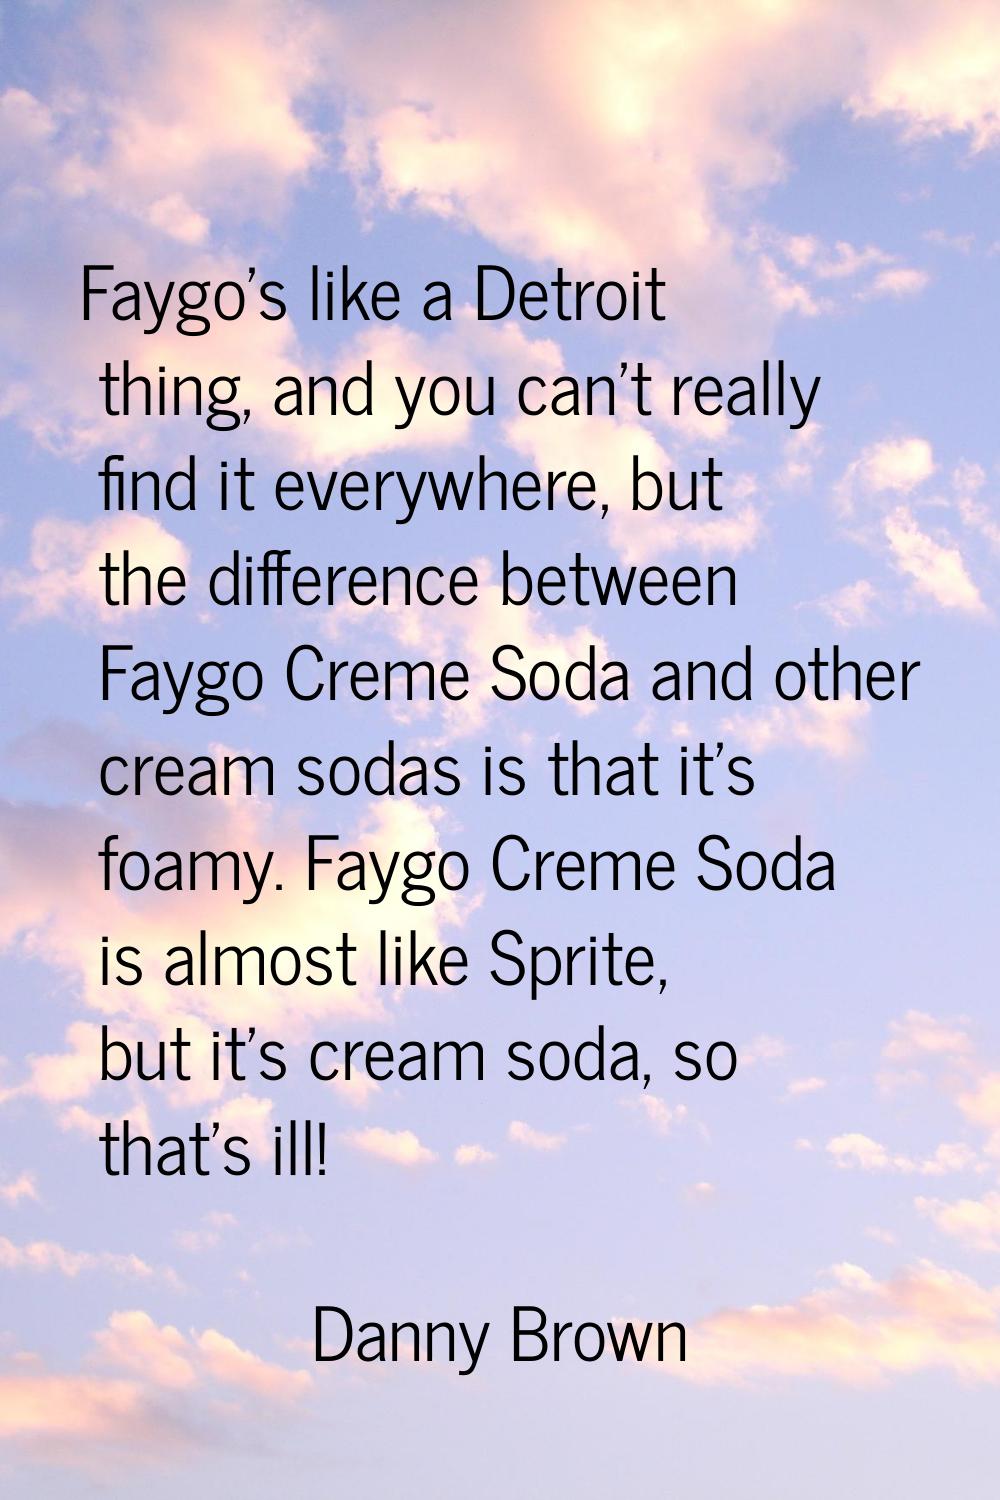 Faygo's like a Detroit thing, and you can't really find it everywhere, but the difference between F